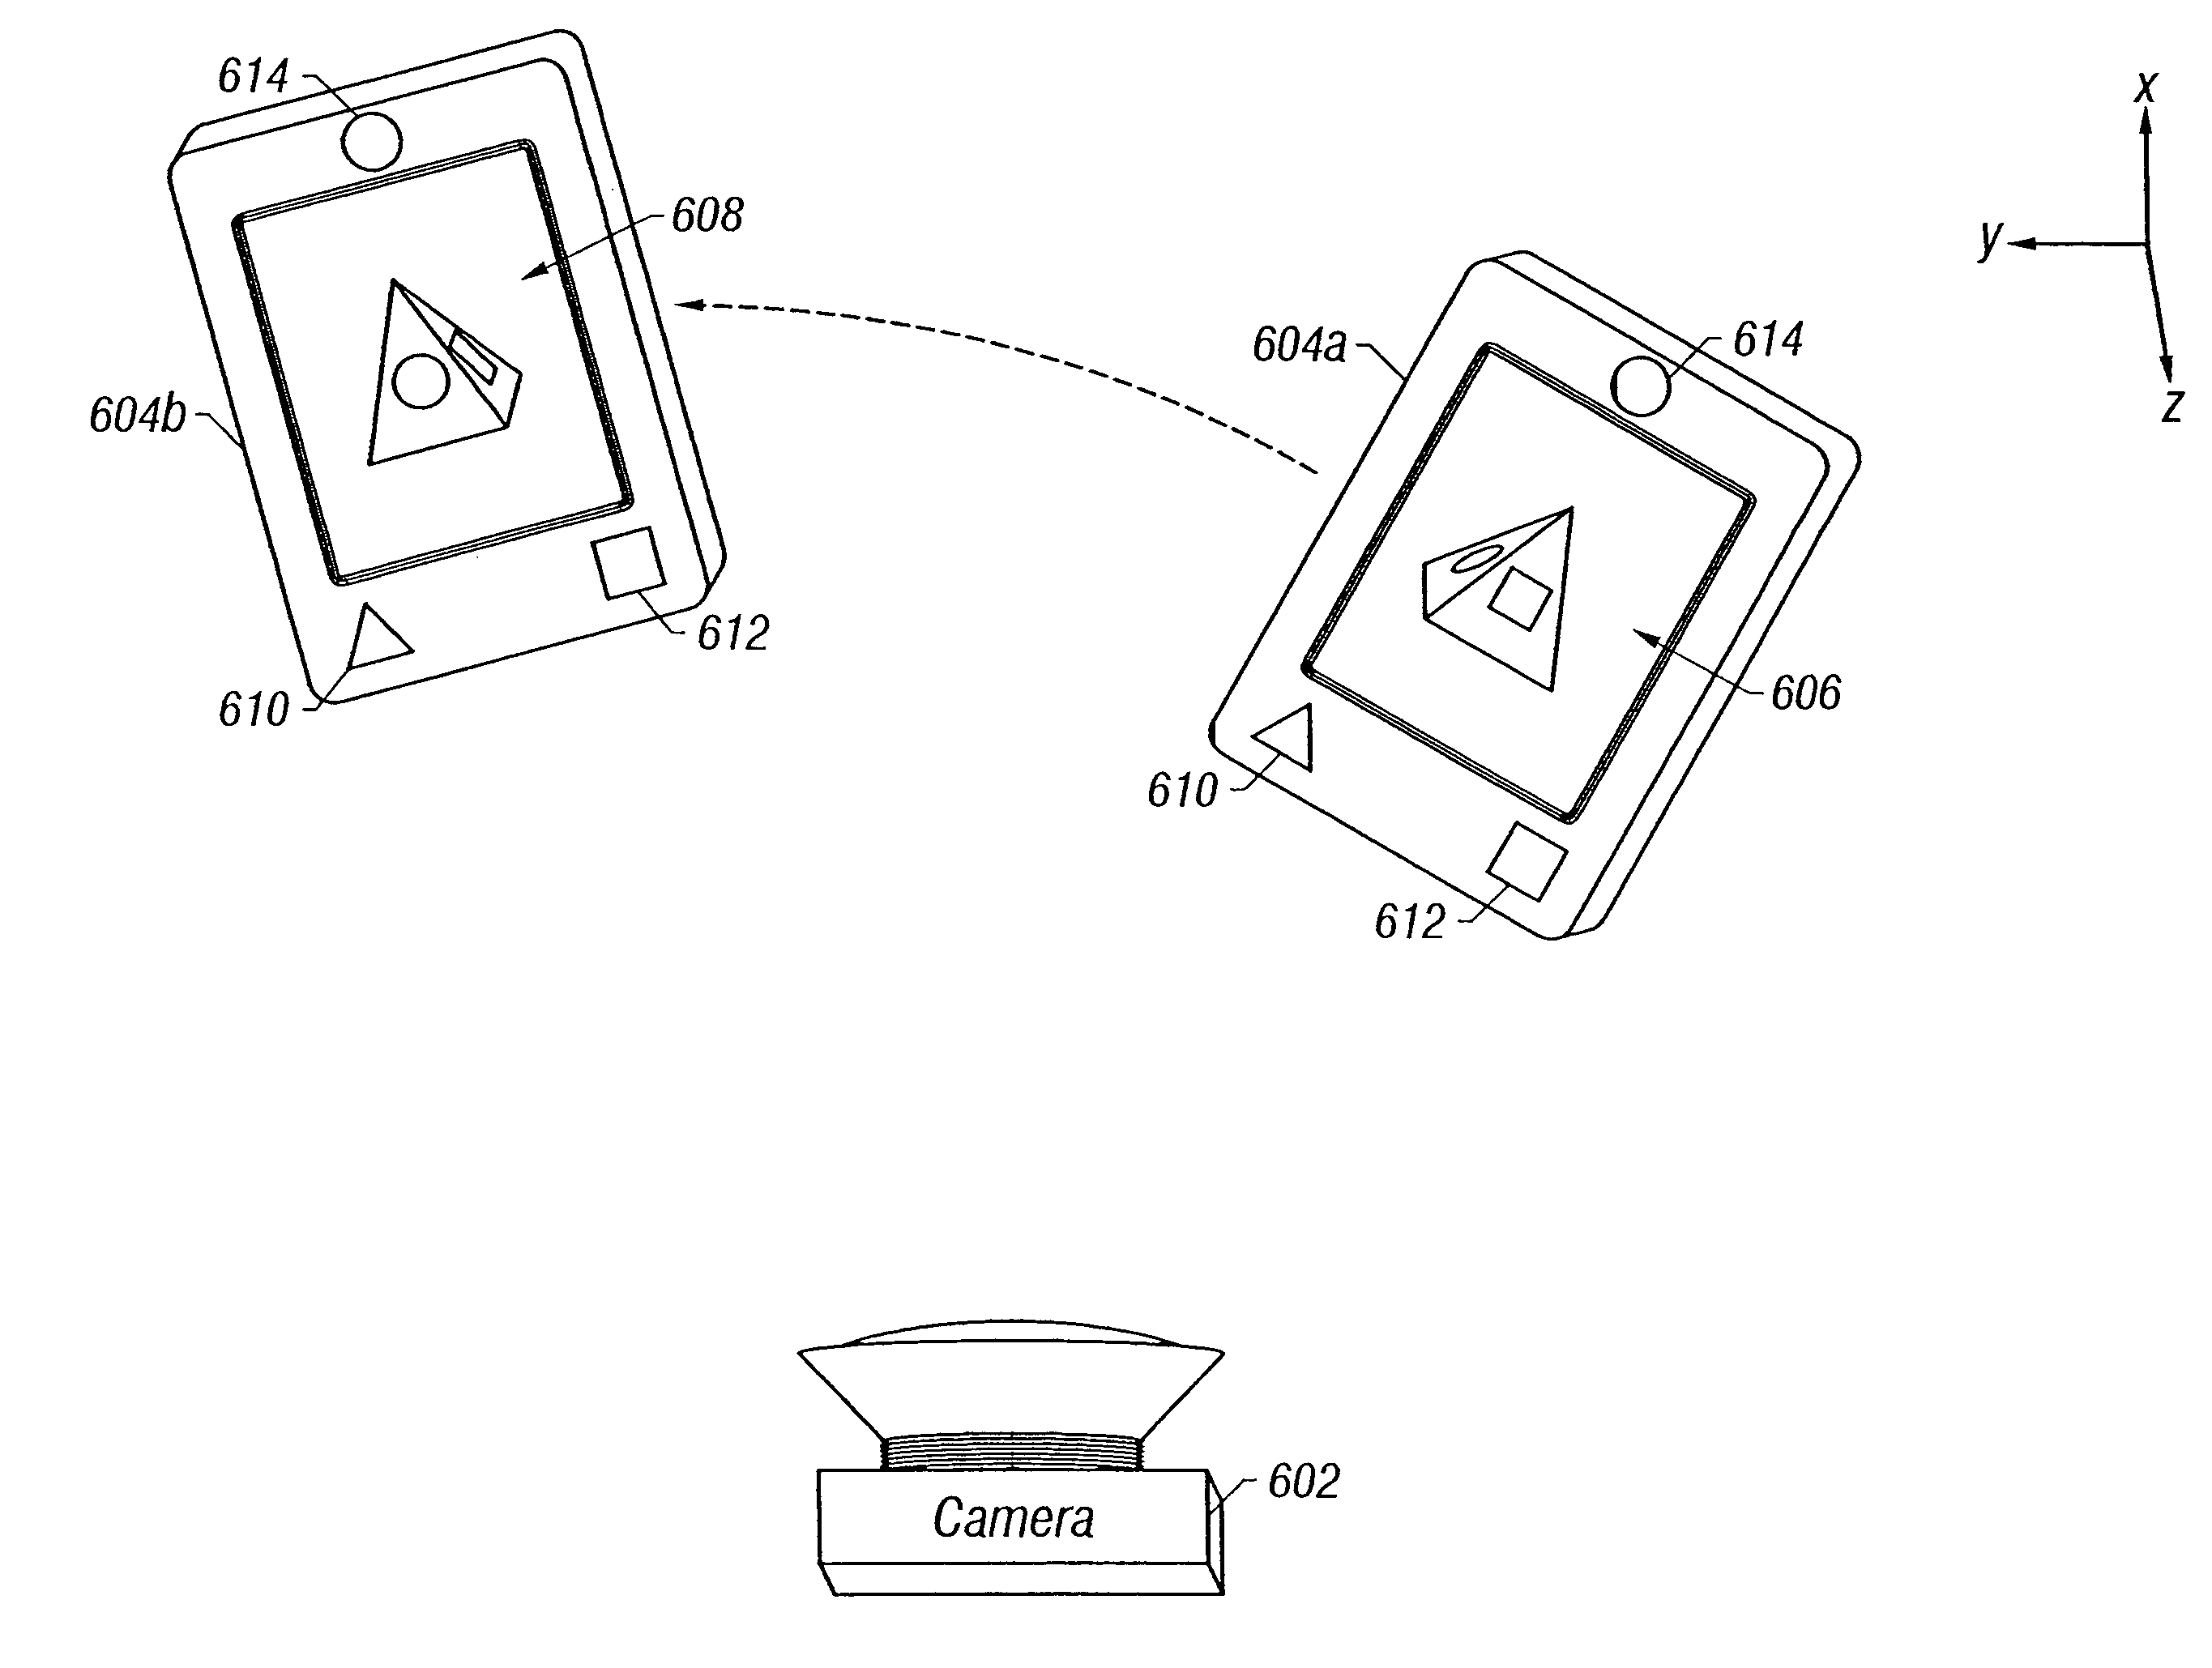 Intuitive mobile device interface to virtual spaces